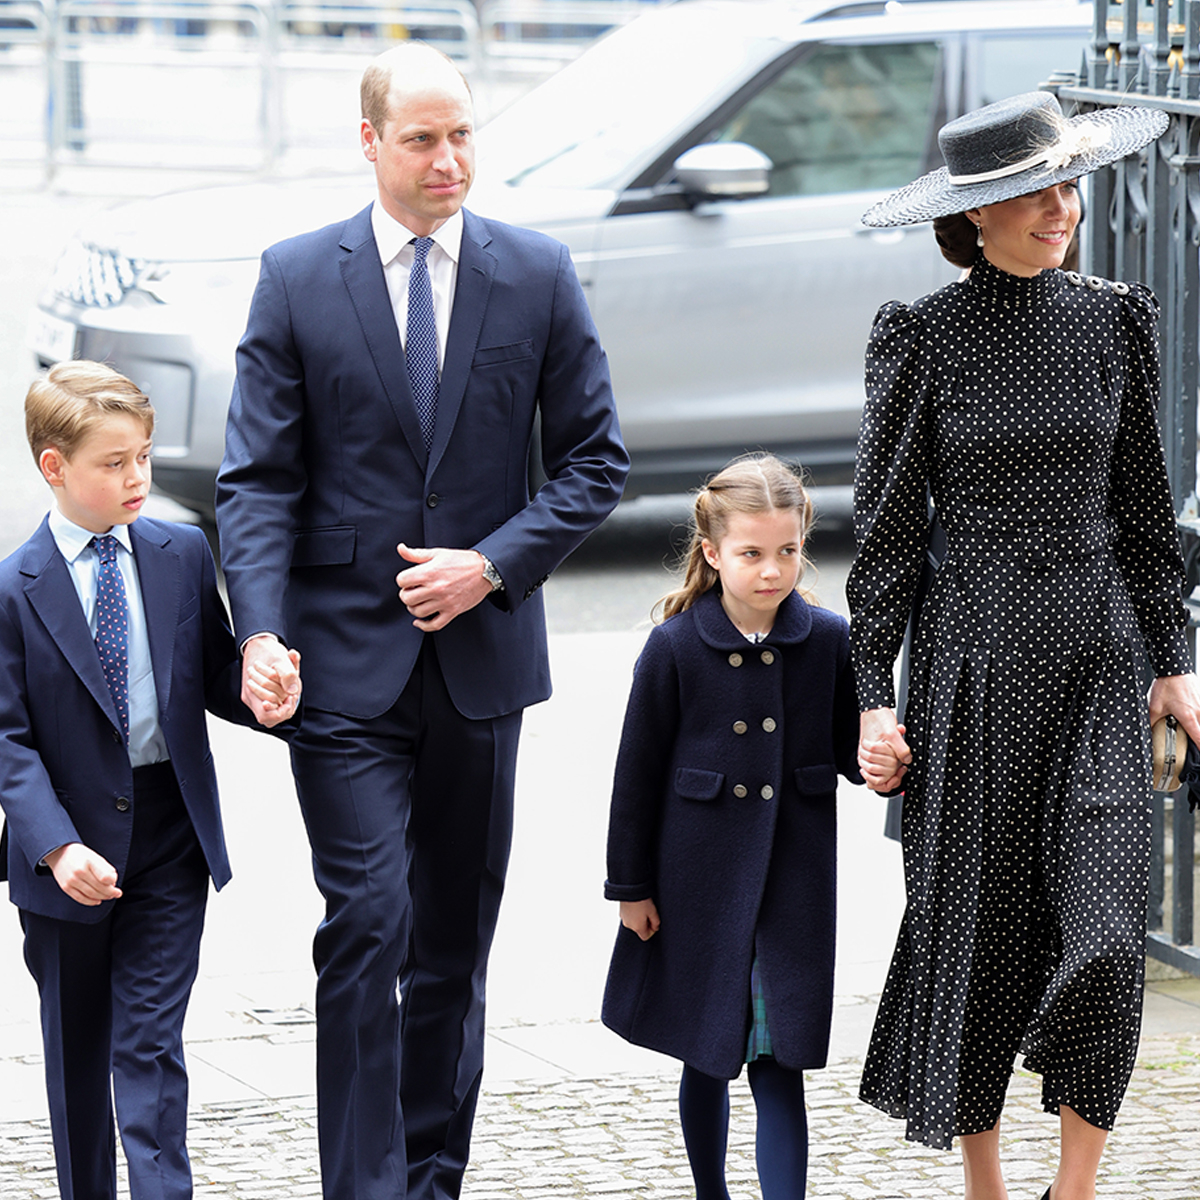 Photos from The Royal Family Attends Prince Philip's Memorial